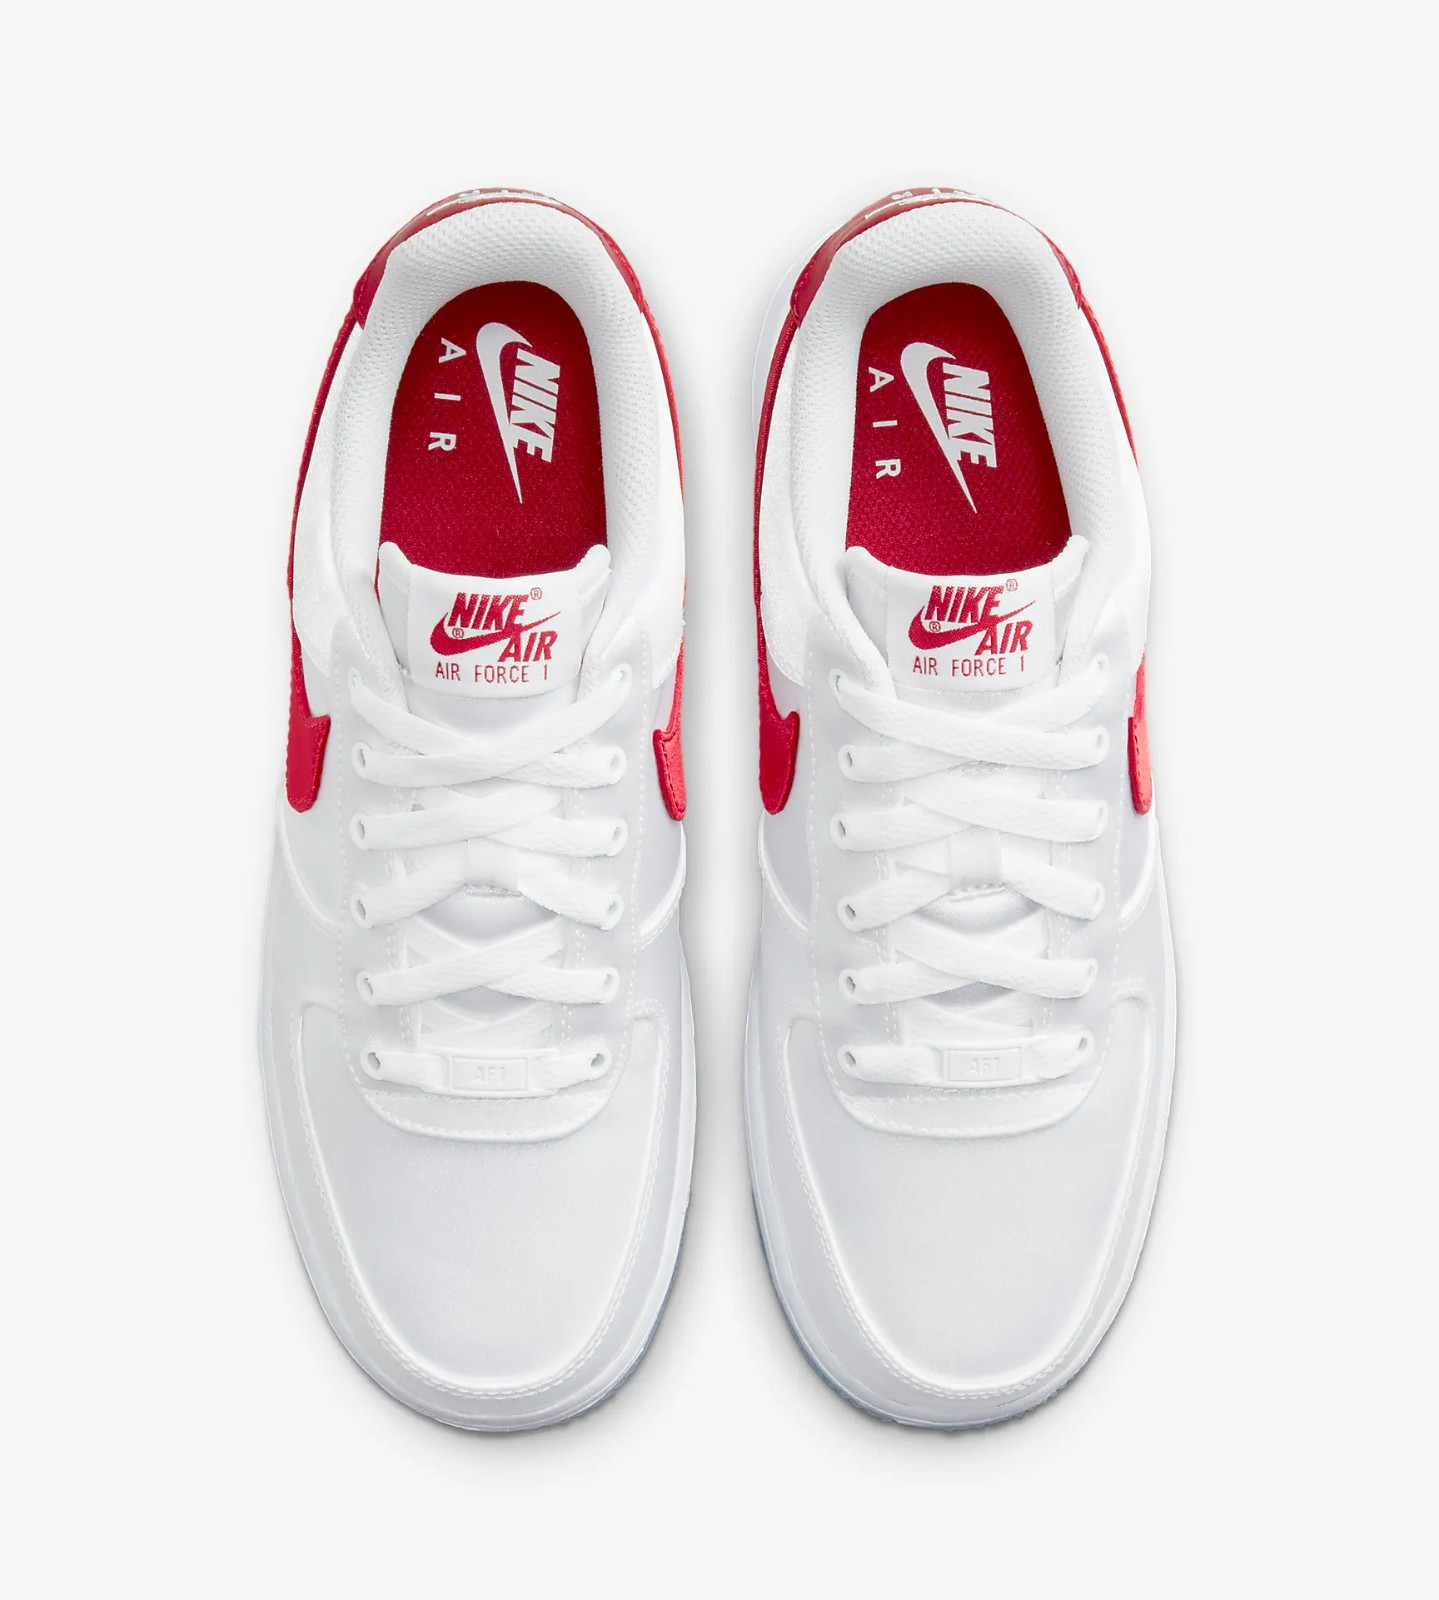 Nike Air Force 1 Low '07 LV8 Red